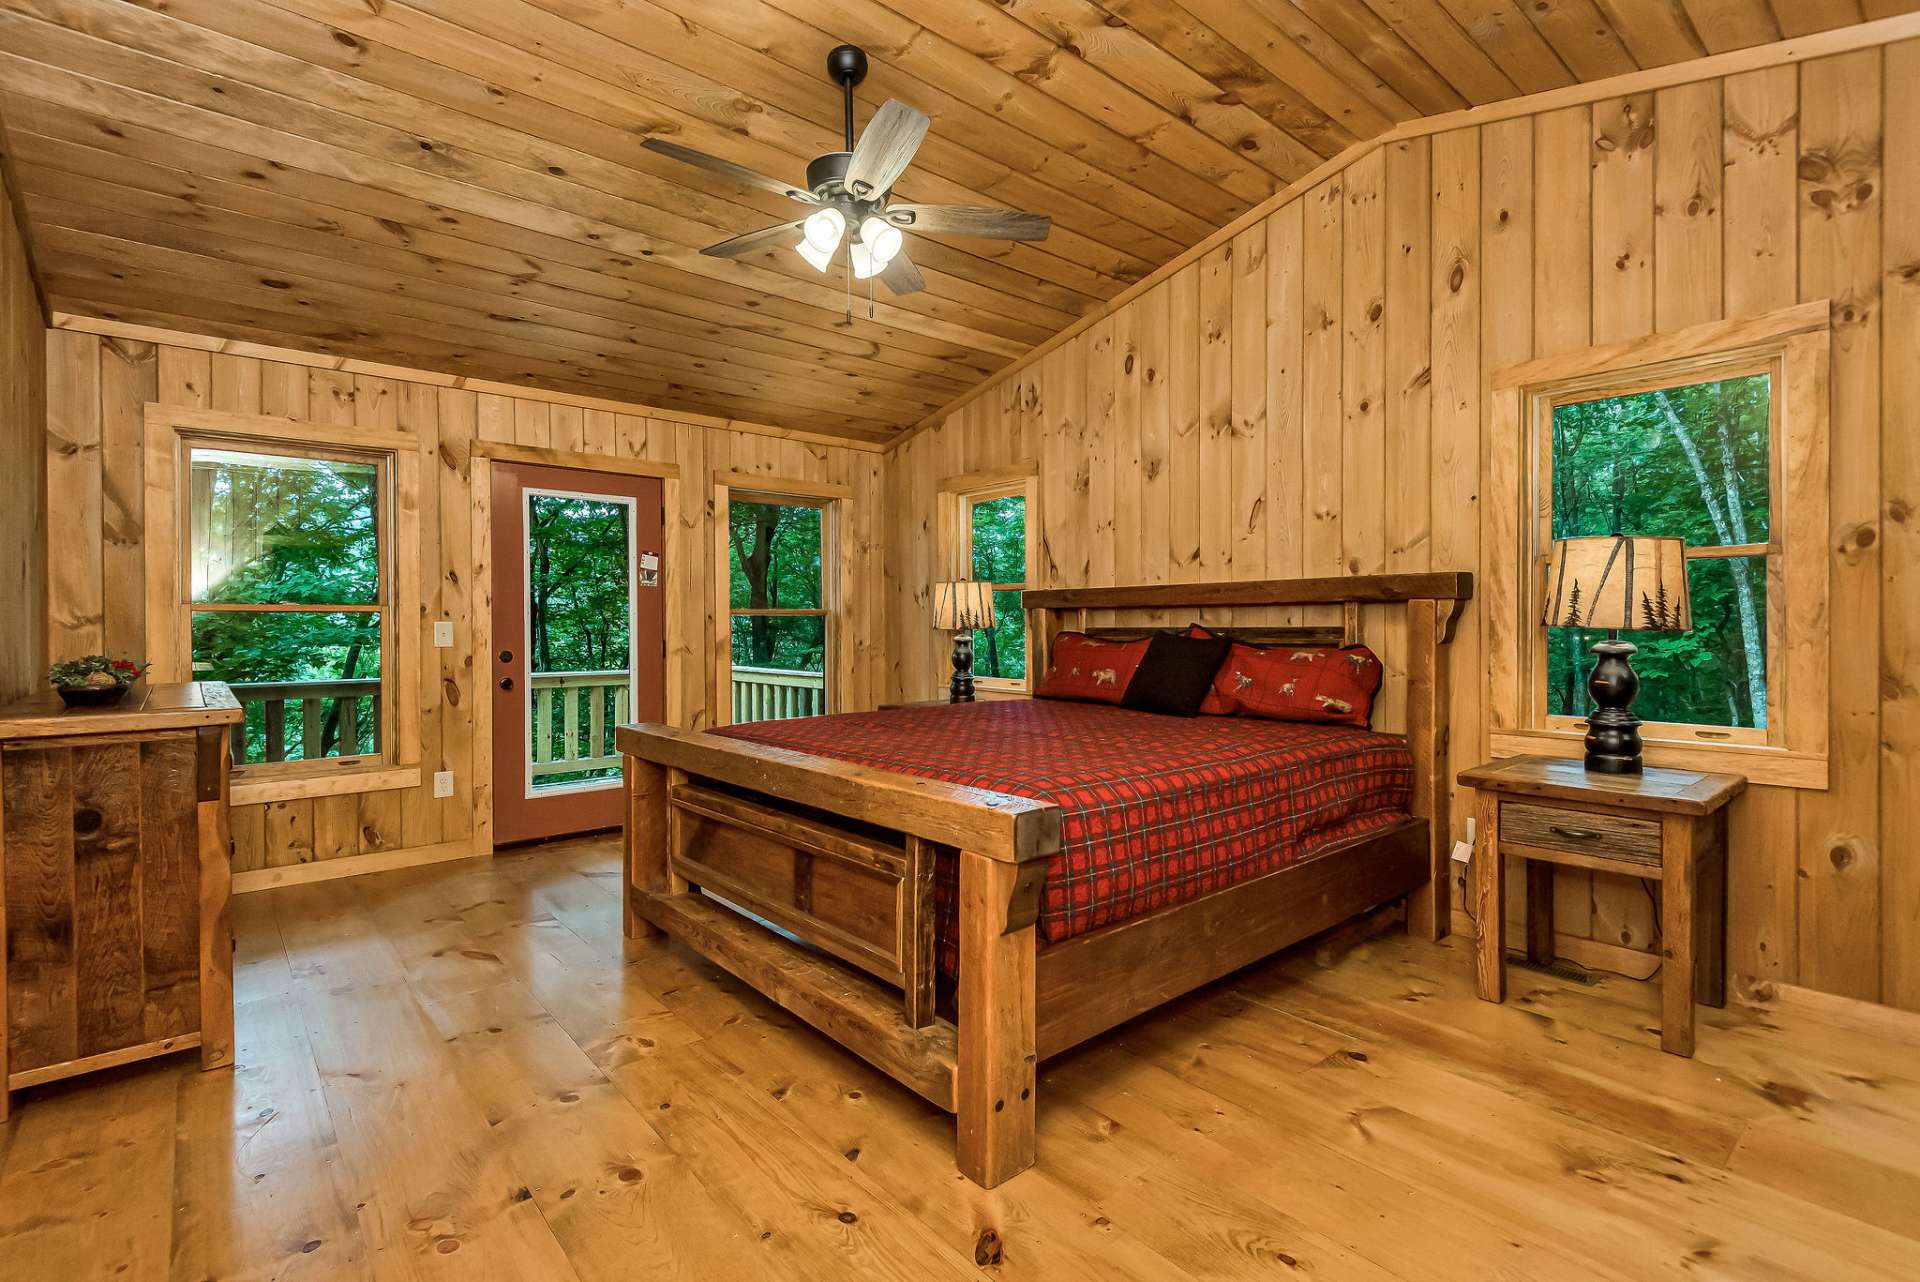 The primary bedroom on the main level offers a peaceful retreat and convenient access to the front deck, where an outdoor fireplace provides a perfect spot to unwind and enjoy the tranquil surroundings